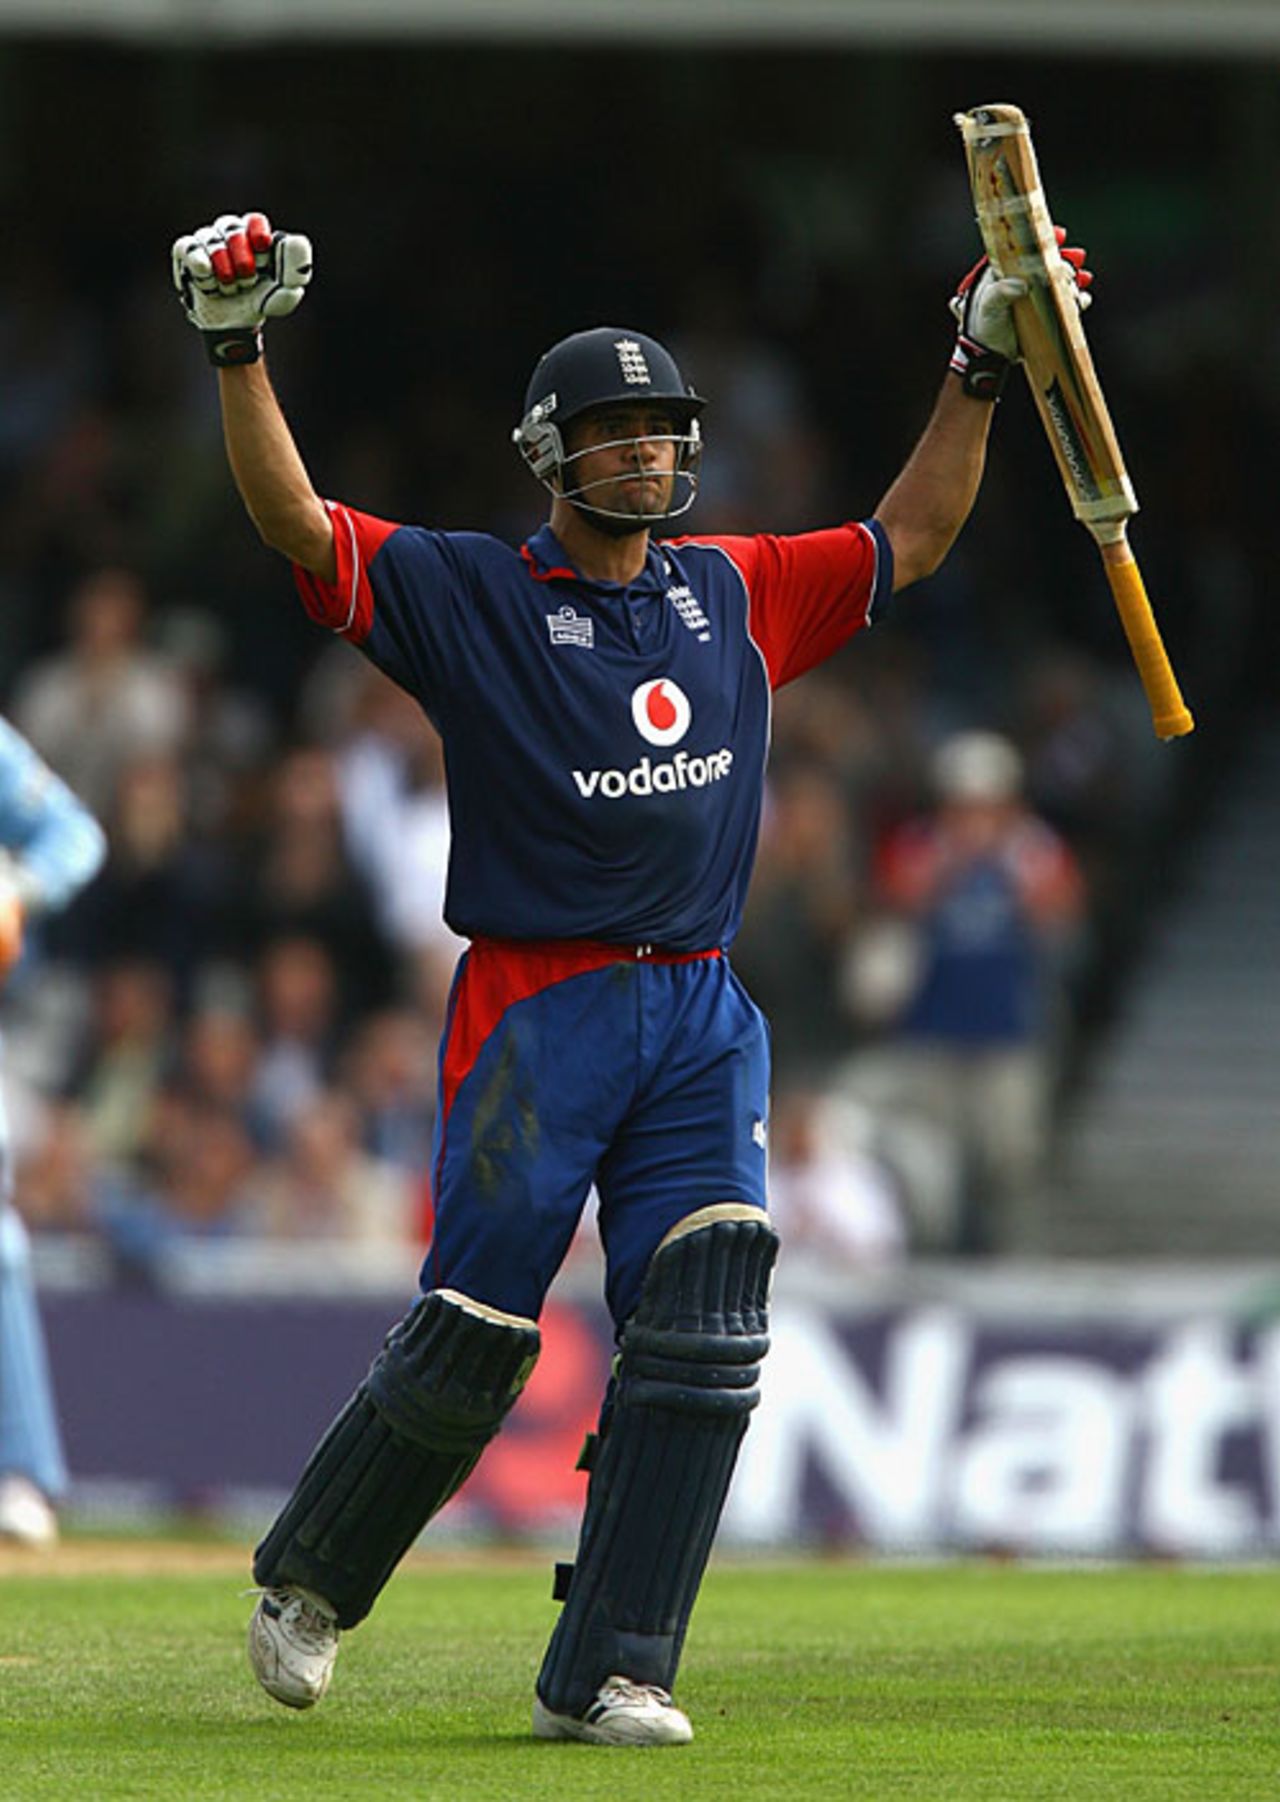 Owais Shah scored his first one-day hundred, England v India, 6th ODI, The Oval, September 5, 2007